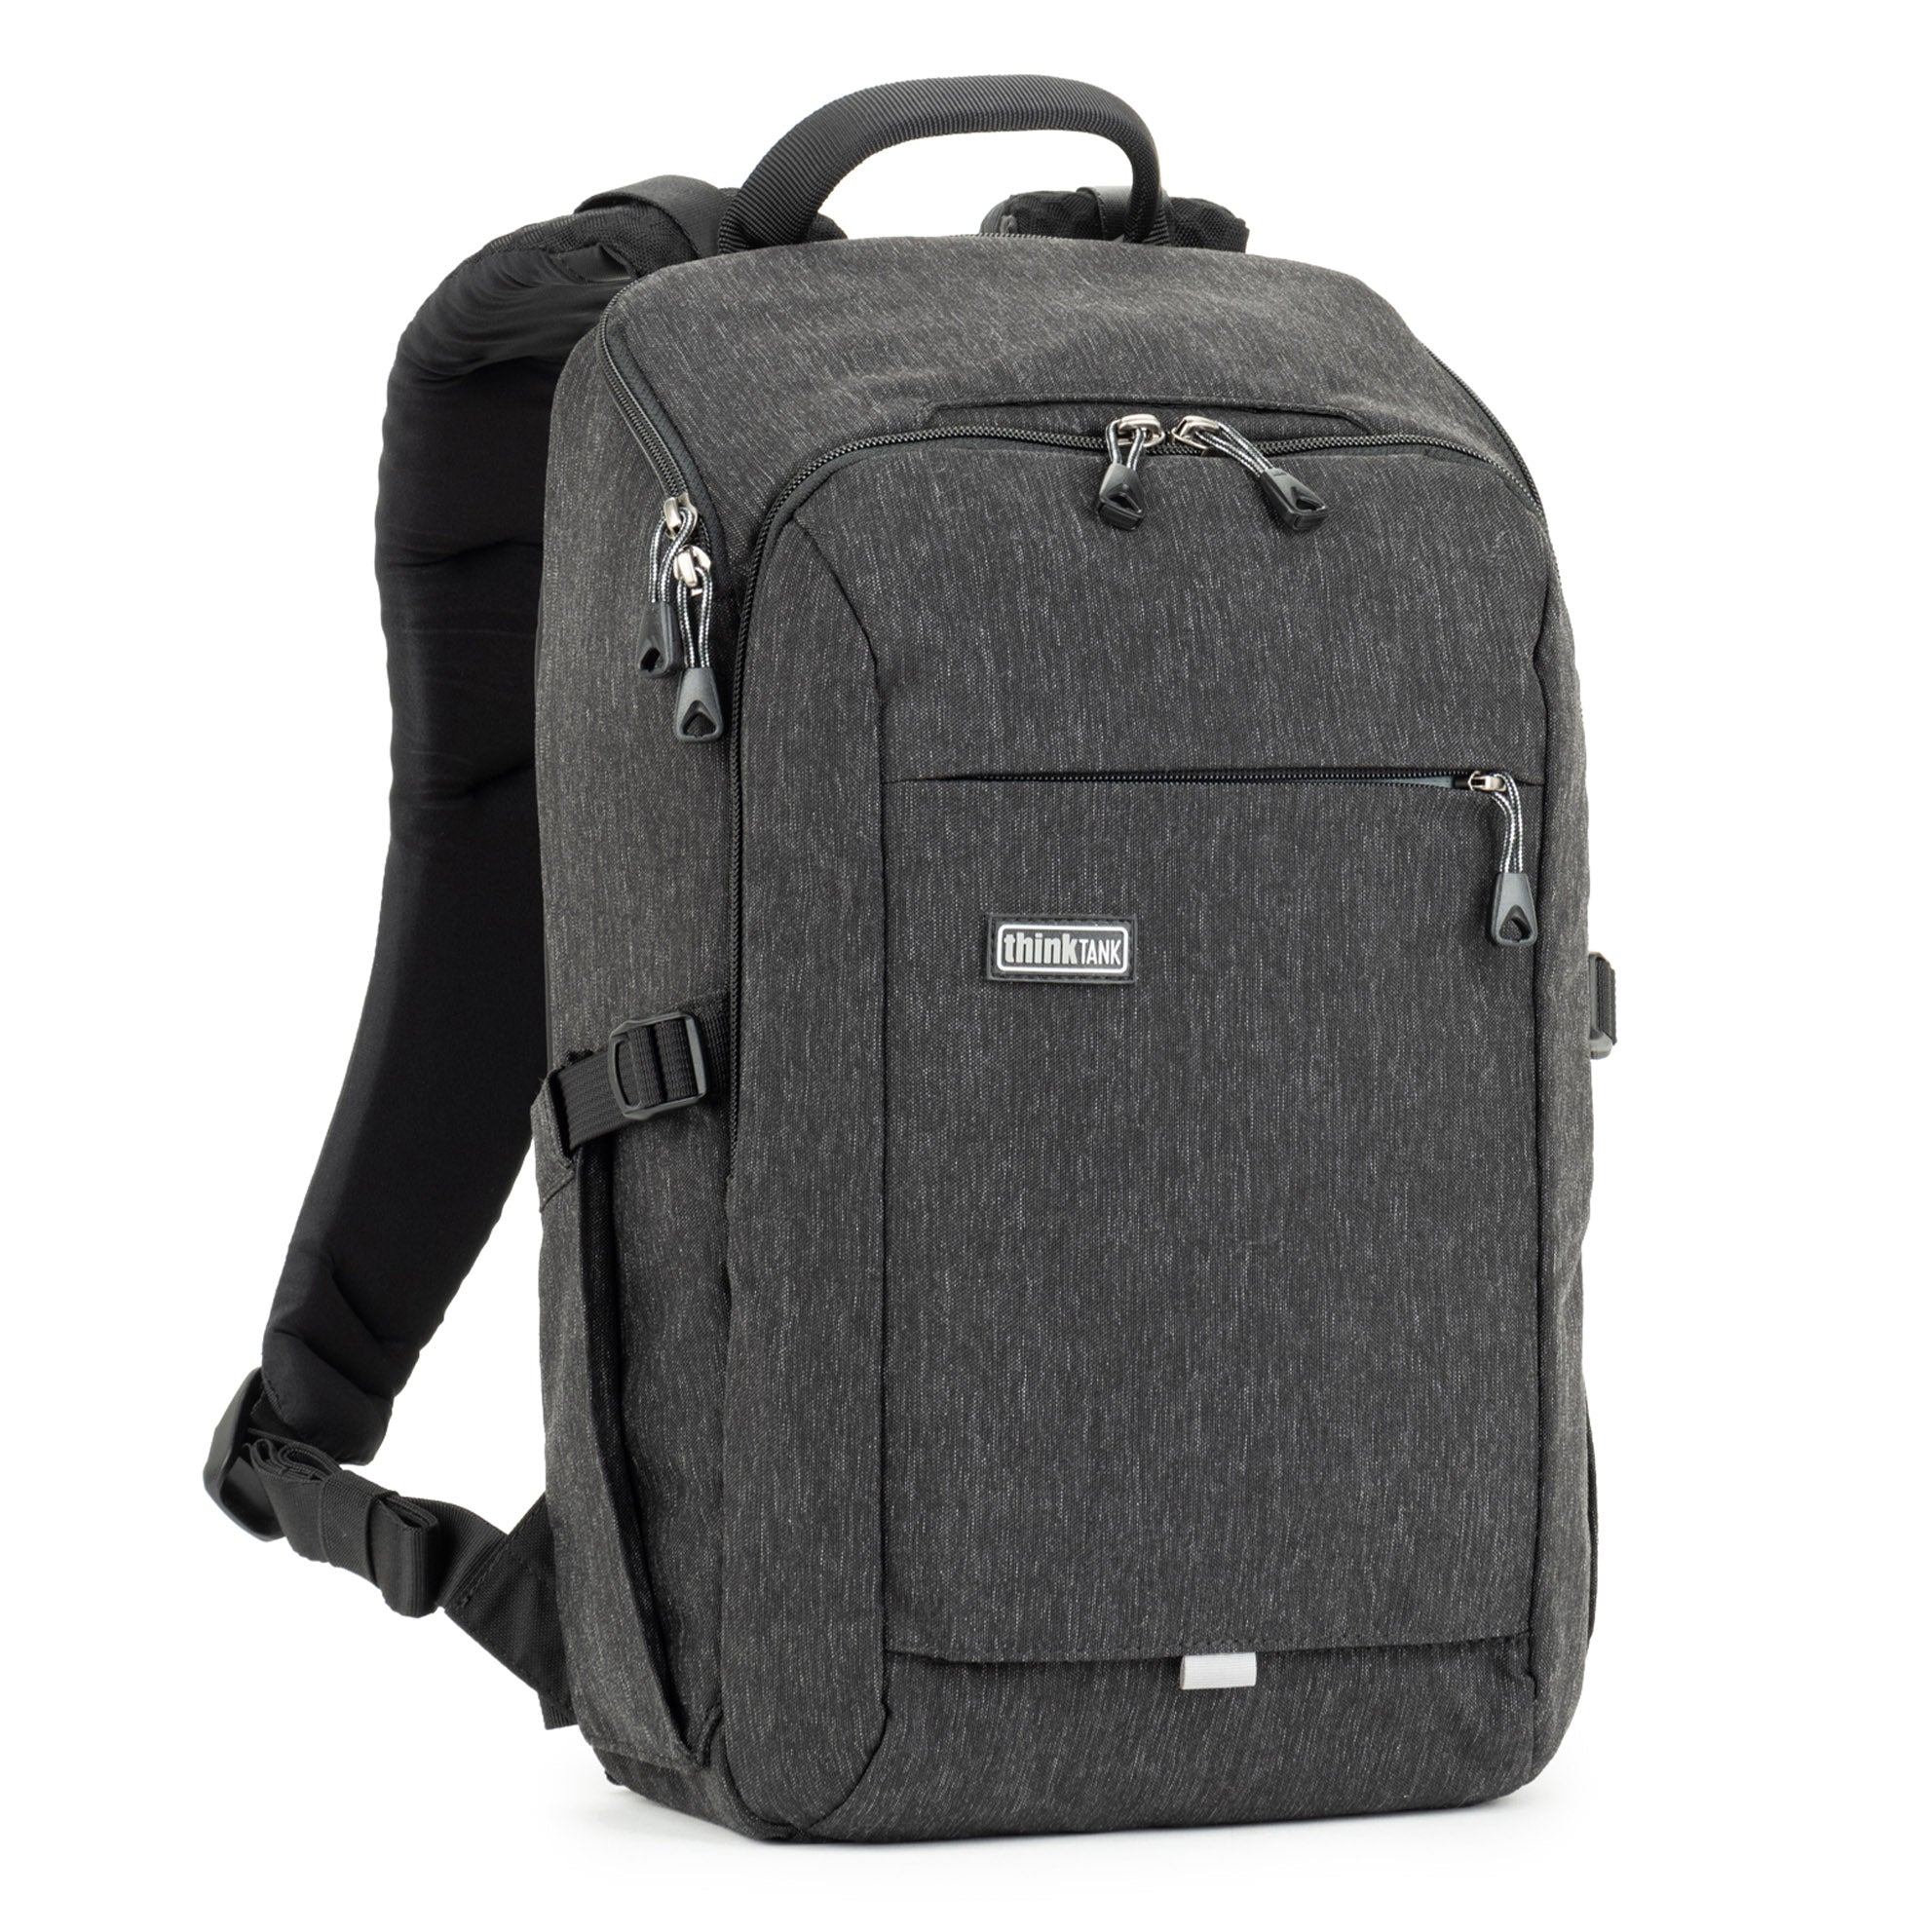 A deep front compartment with zippered mesh pockets has ample room for personal gear, including a 10” tablet and 13" laptop